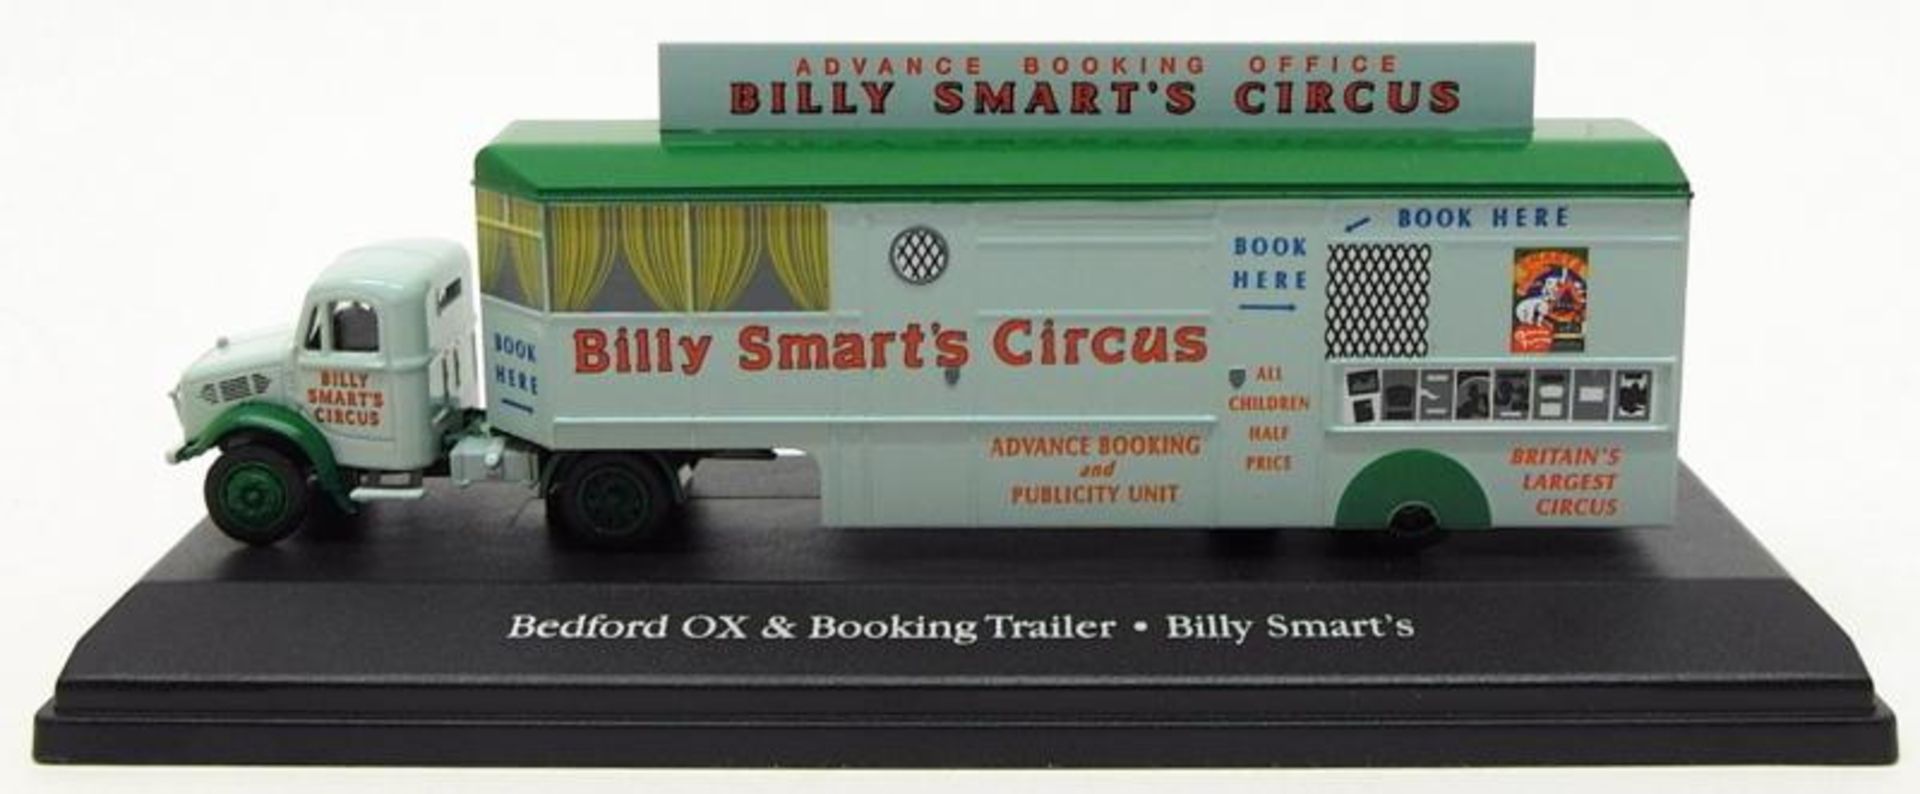 V Brand New Collectors Edition Die-Cast Billy Smart's Bedford Ox Truck And Booking Trailer - Mounted